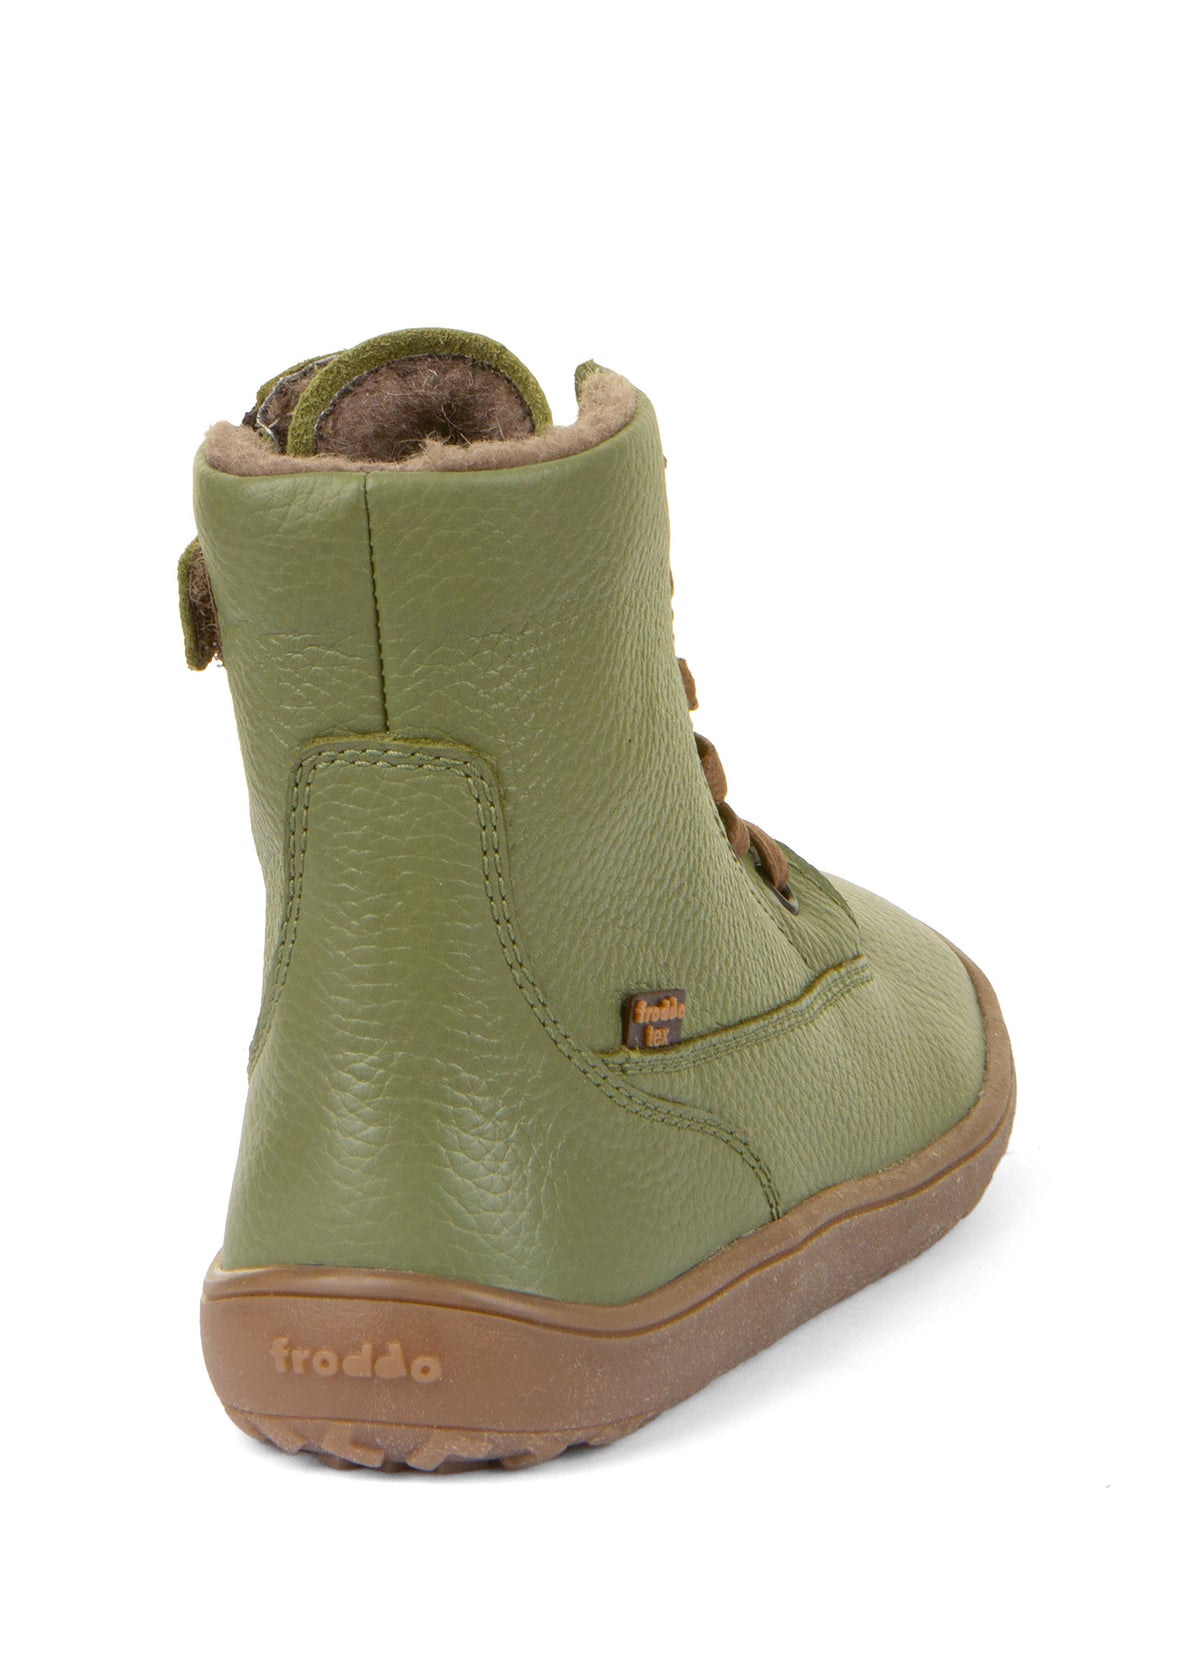 Barefoot shoes - leather winter shoes, TEX Laces - olive green